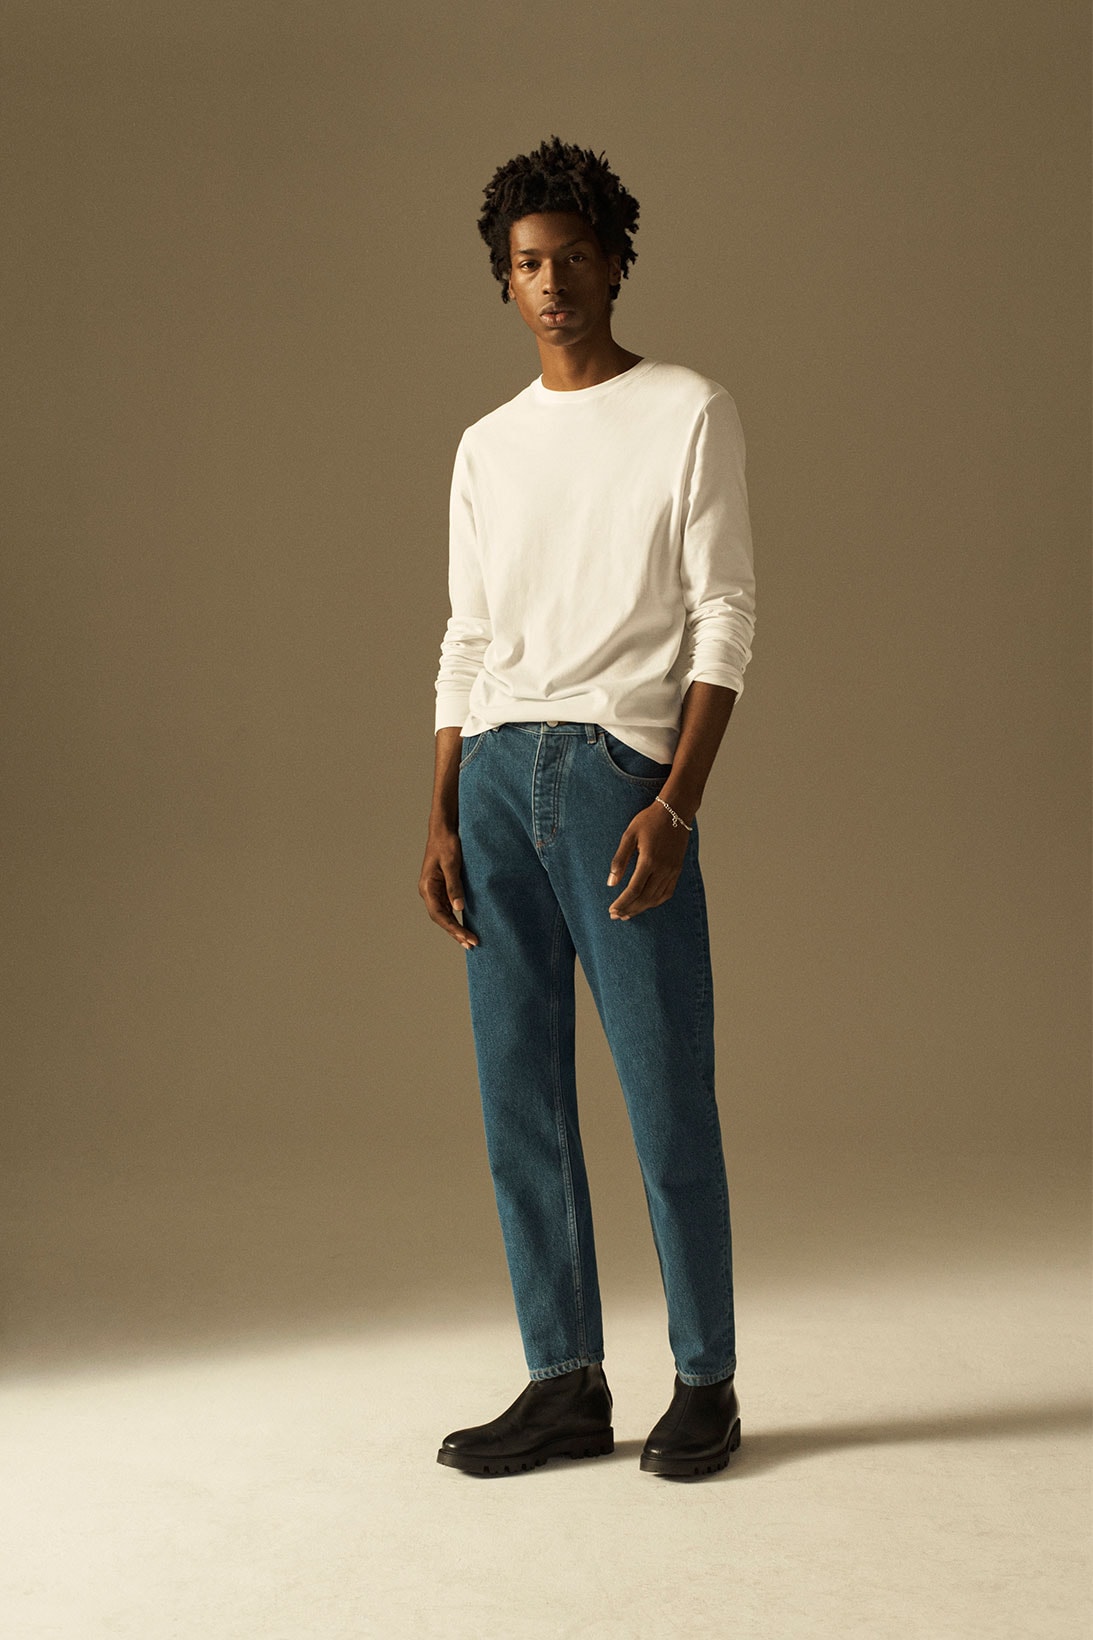 cos spring summer 2021 ss21 sustainable denim collection jeans white tee shirt